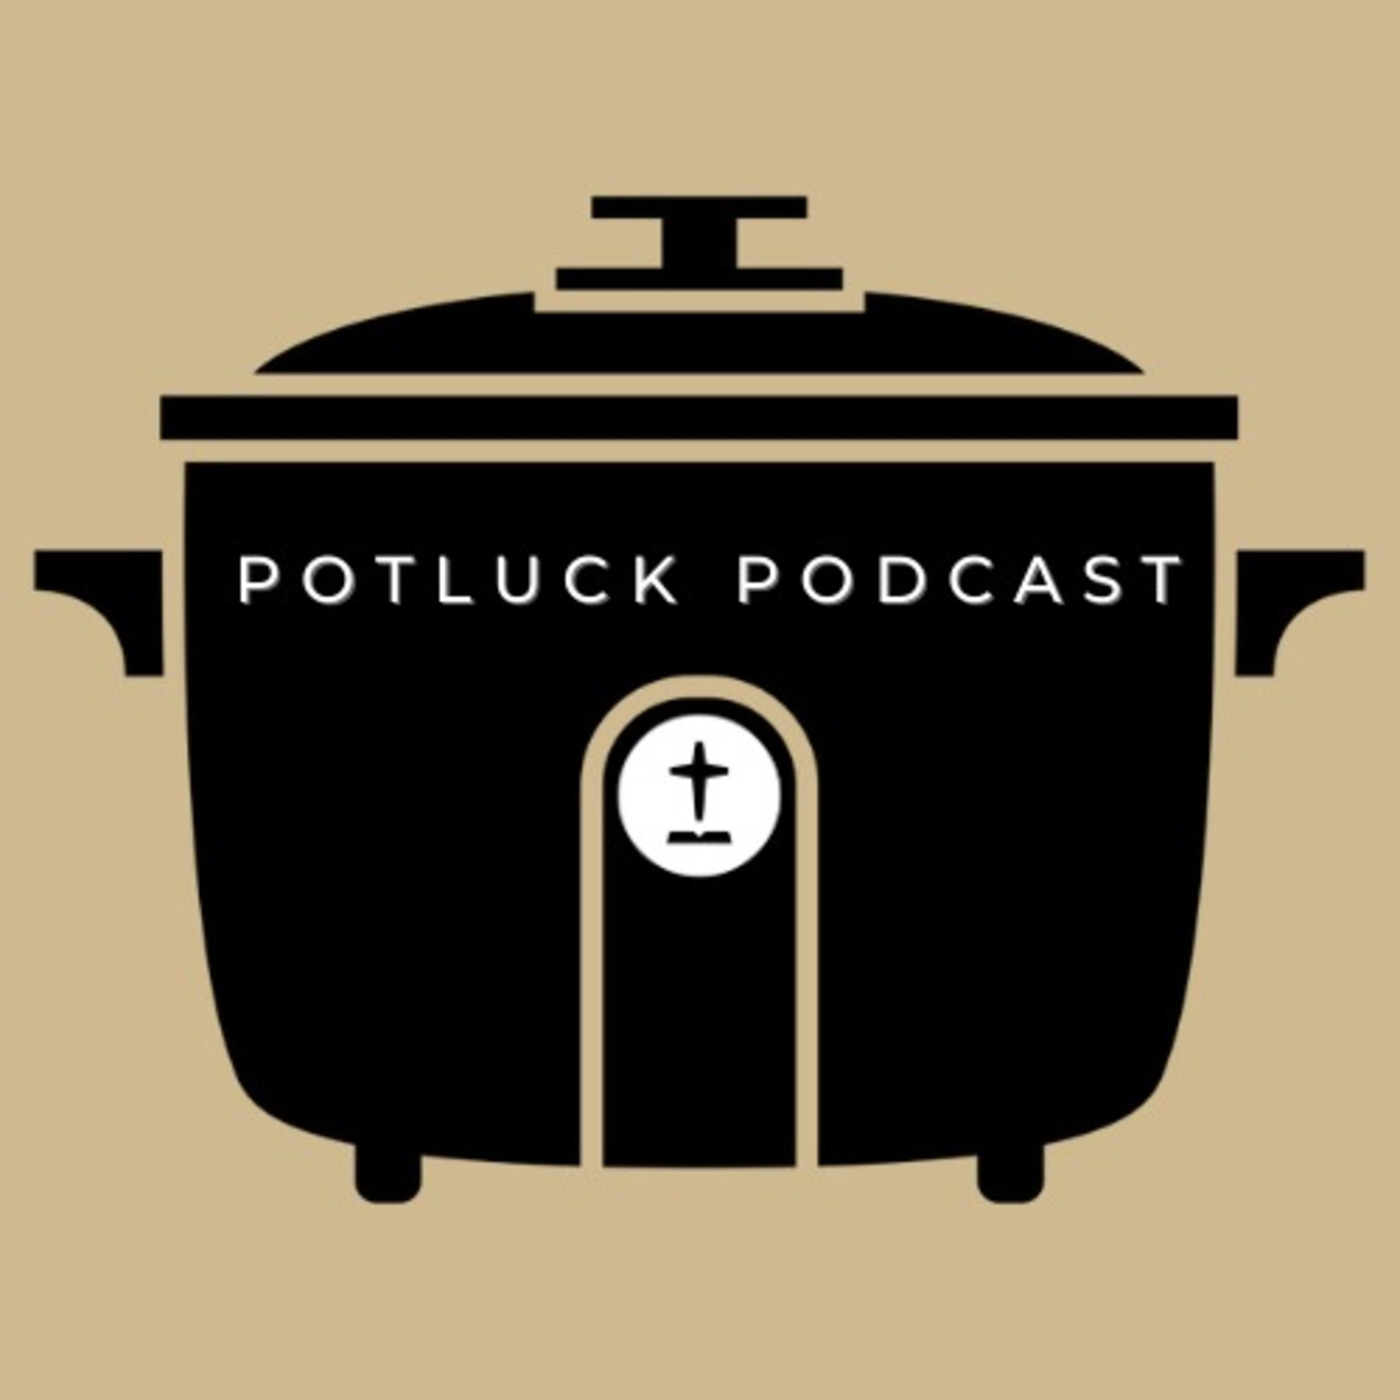 Episode 252: POTLUCK PODCAST 185: Tornadoes, Music Videos, and Christmas Sweets